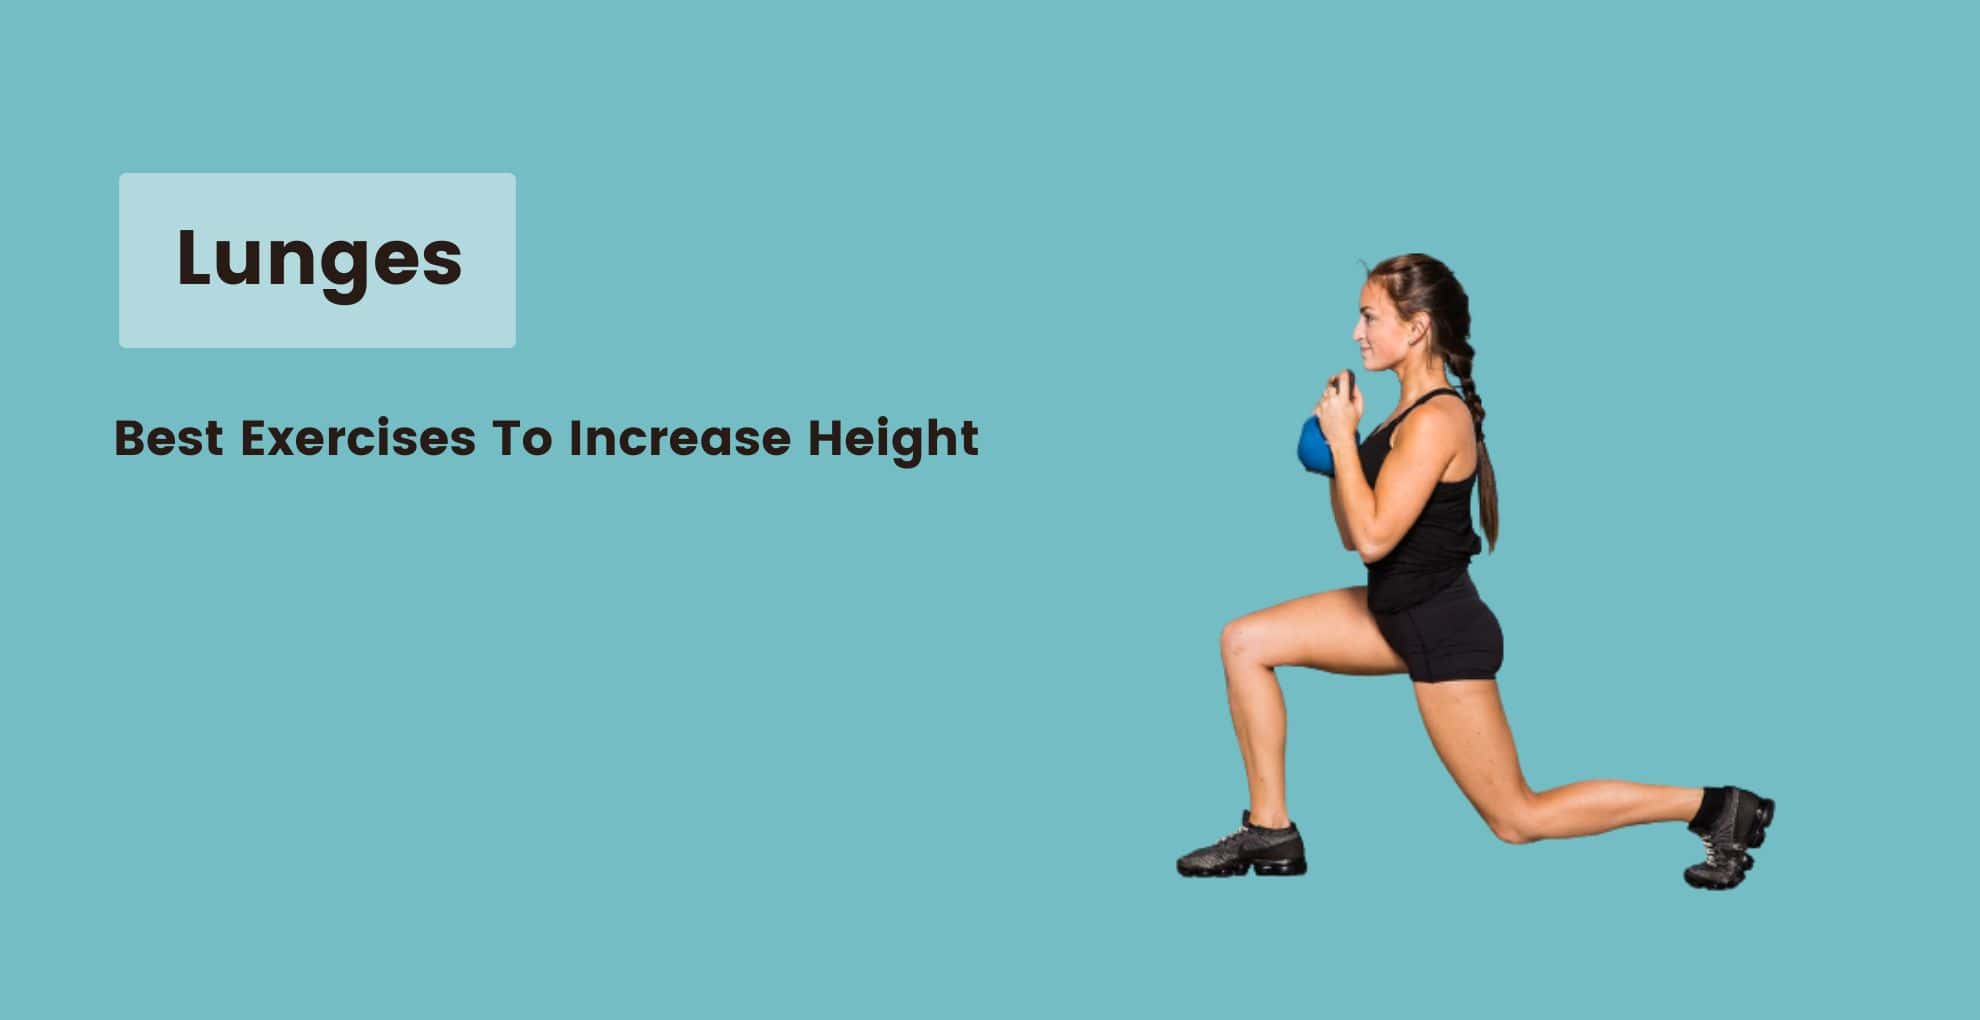 Top 5 exercises to increase height